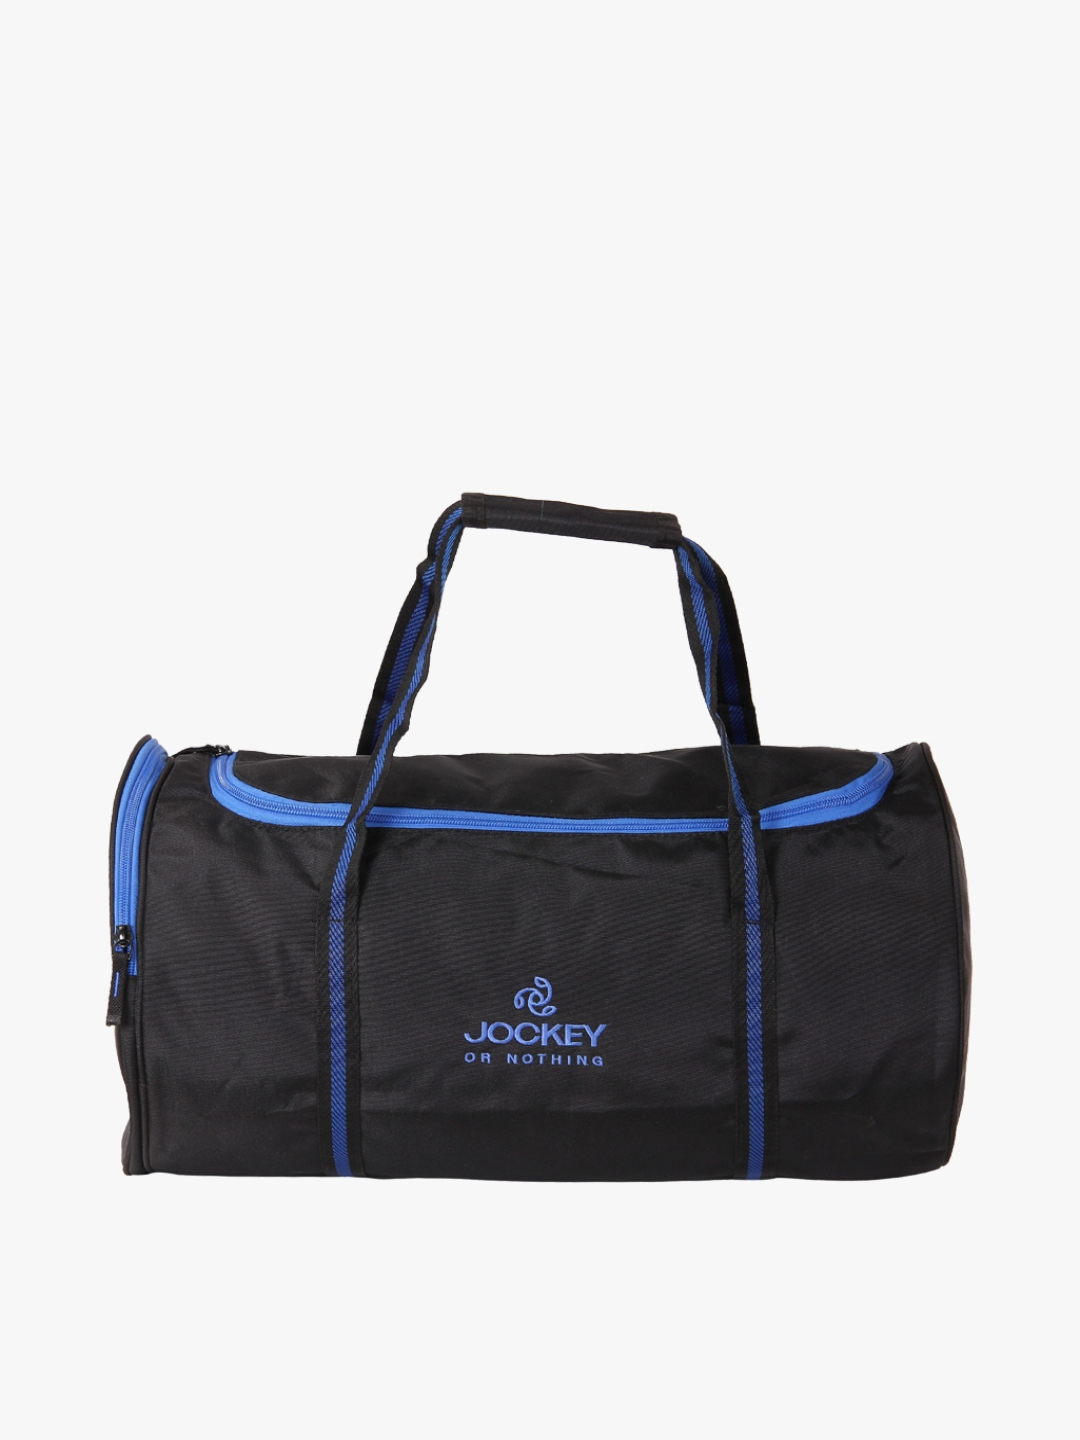 Jockey Exclusive Store  Shop 2999 and above get a gym bag free  Facebook